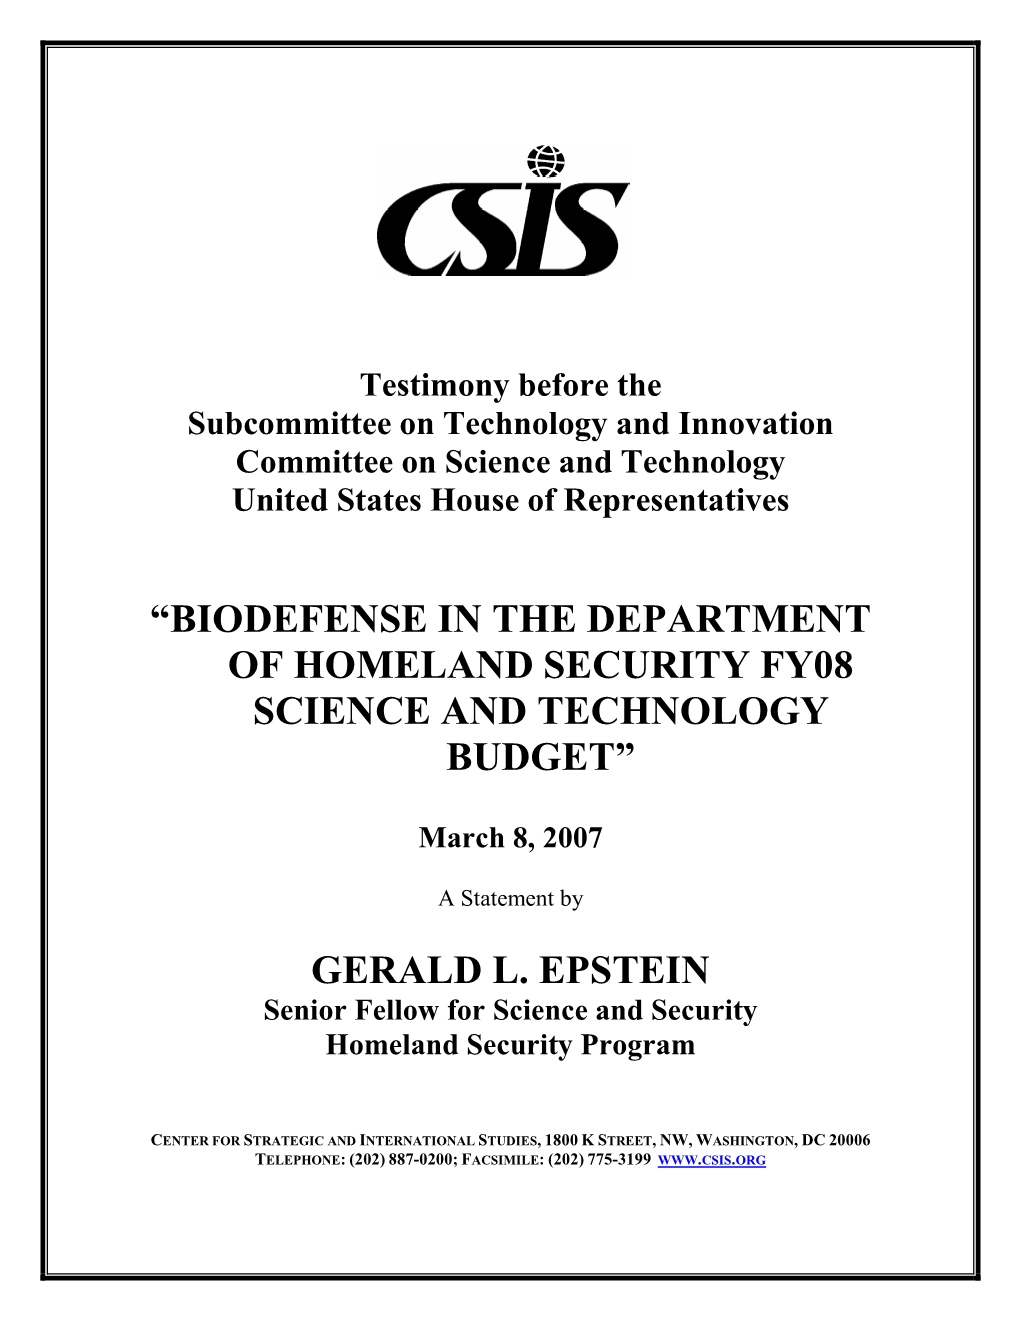 Biodefense in the DHS FY08 Science and Technology Budget